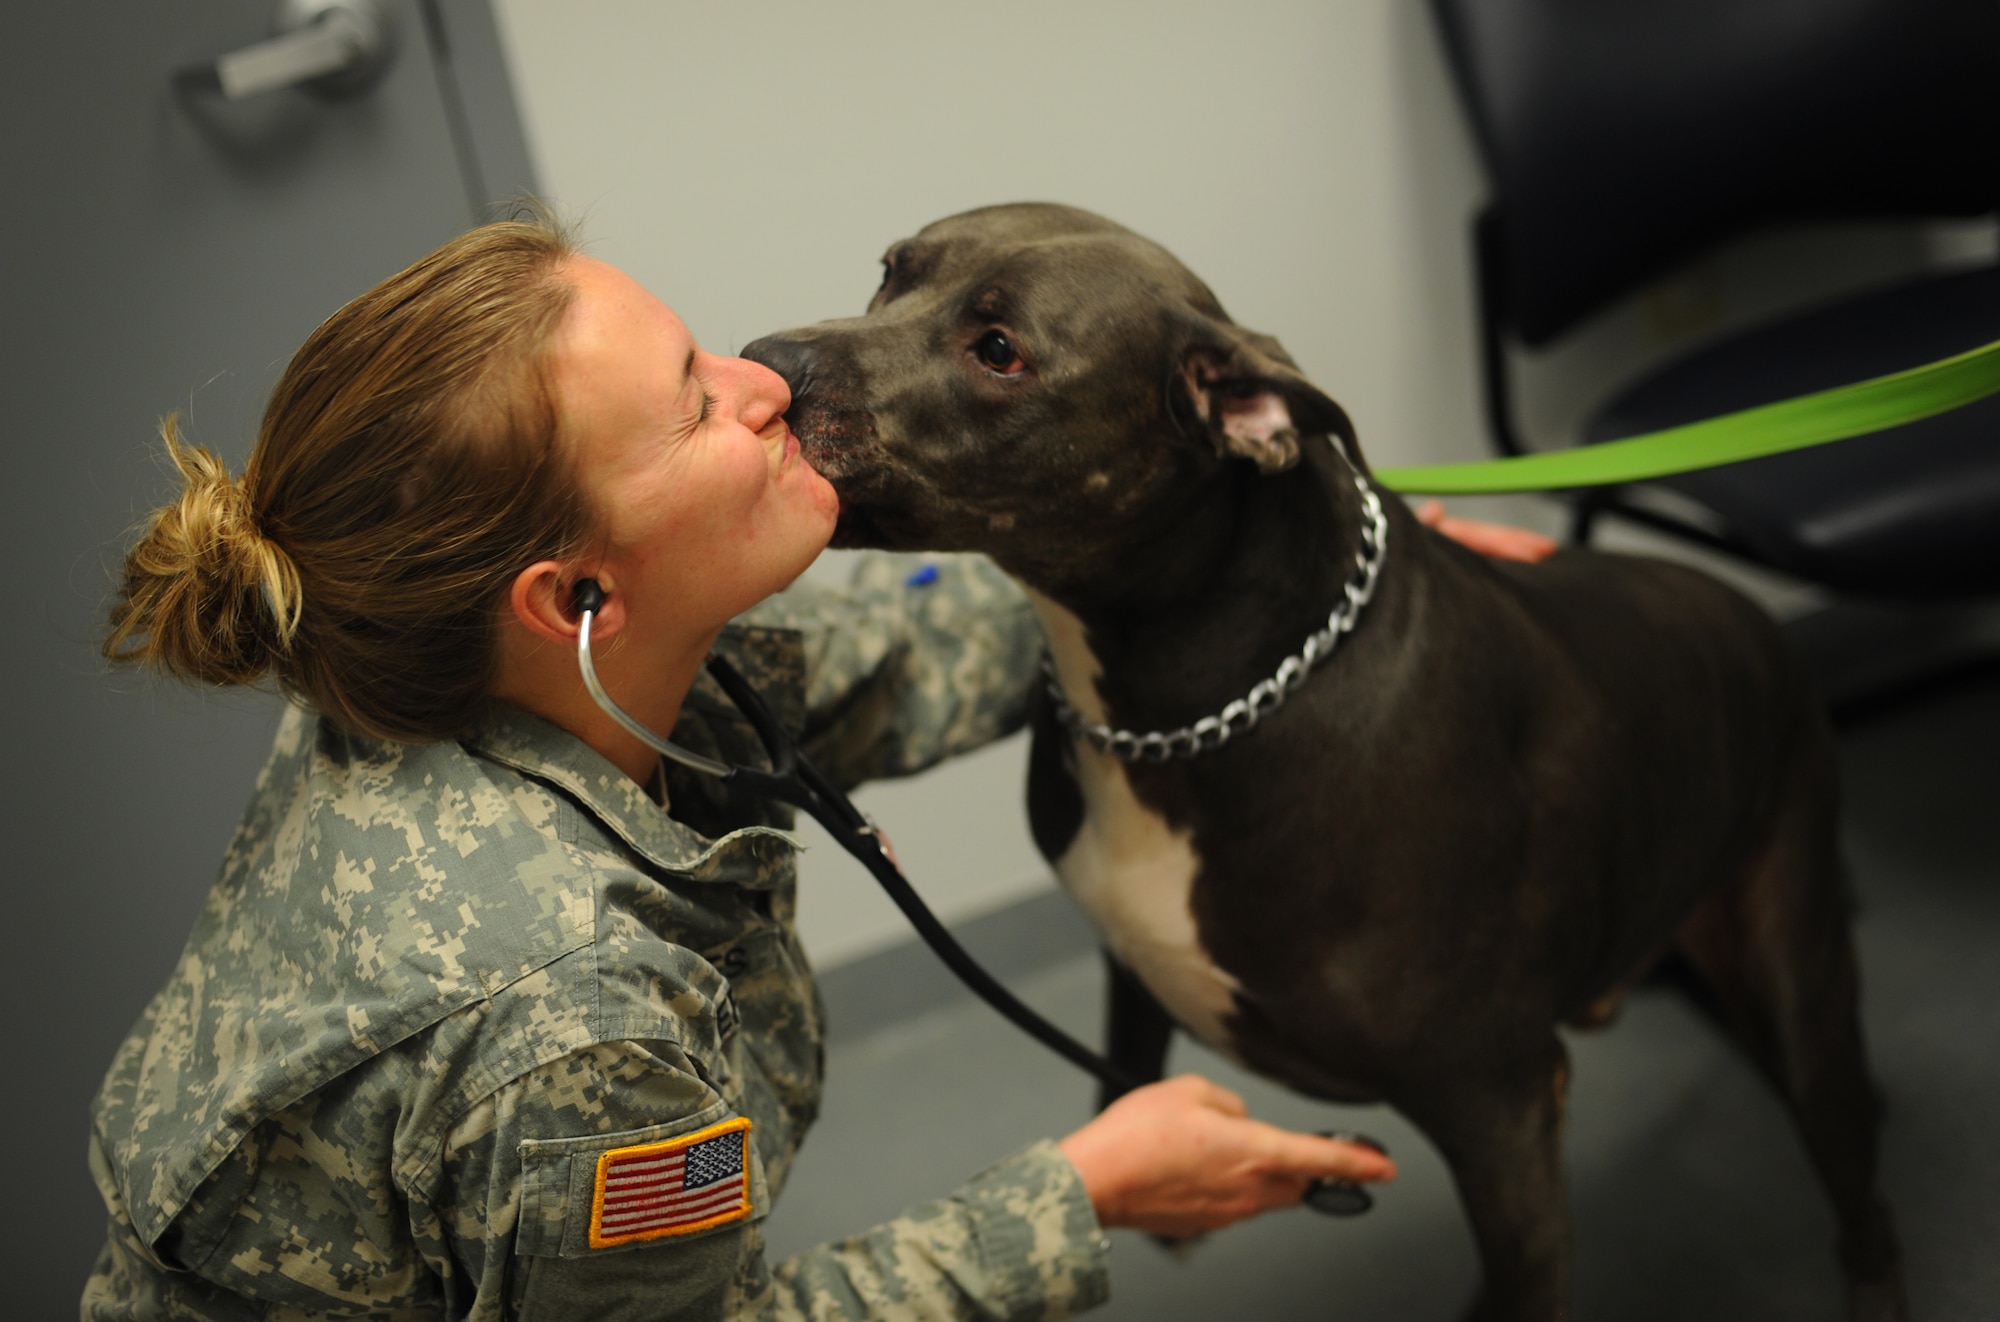 Army Capt. Amanda Jeffries, Chief of Dover Branch Veterinary Services, receives a kiss from her patient Dutch prior to an examination October 15, 2014, at the Veterinary Treatment Facility on Dover Air Force Base, Del. While the main mission of the VTF is to care for the 436th Security Forces Squadron Military Working Dogs, they also provide wellness appointments for privately owned animals. (U.S. Air Force photo by Staff Sgt. Elizabeth Morris)